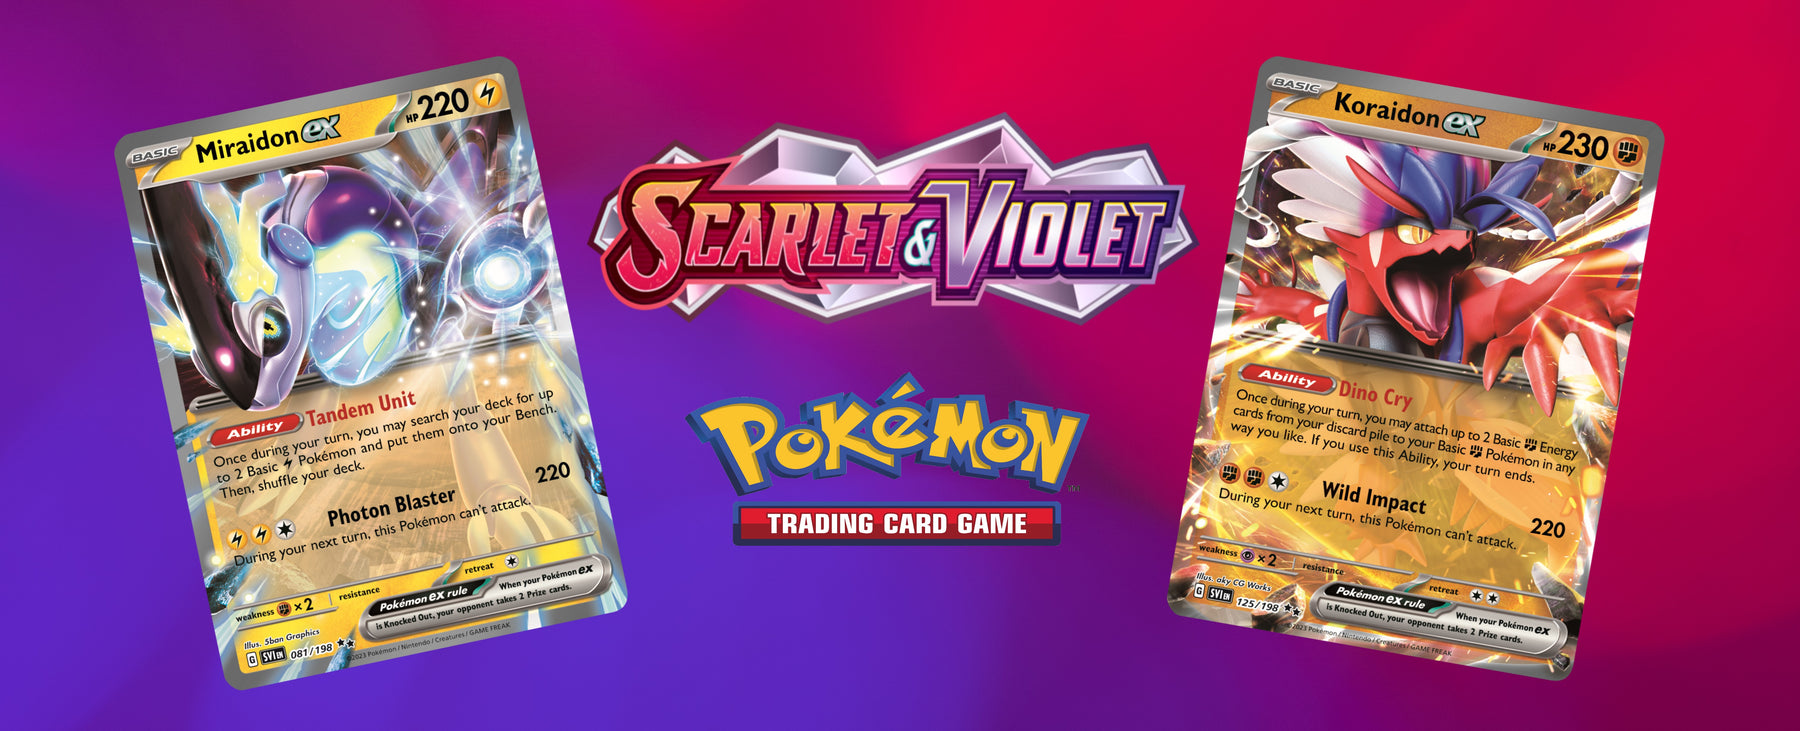 Pokémon TCG: Scarlet & Violet Brings Changes to the Pokémon Trading Card Game